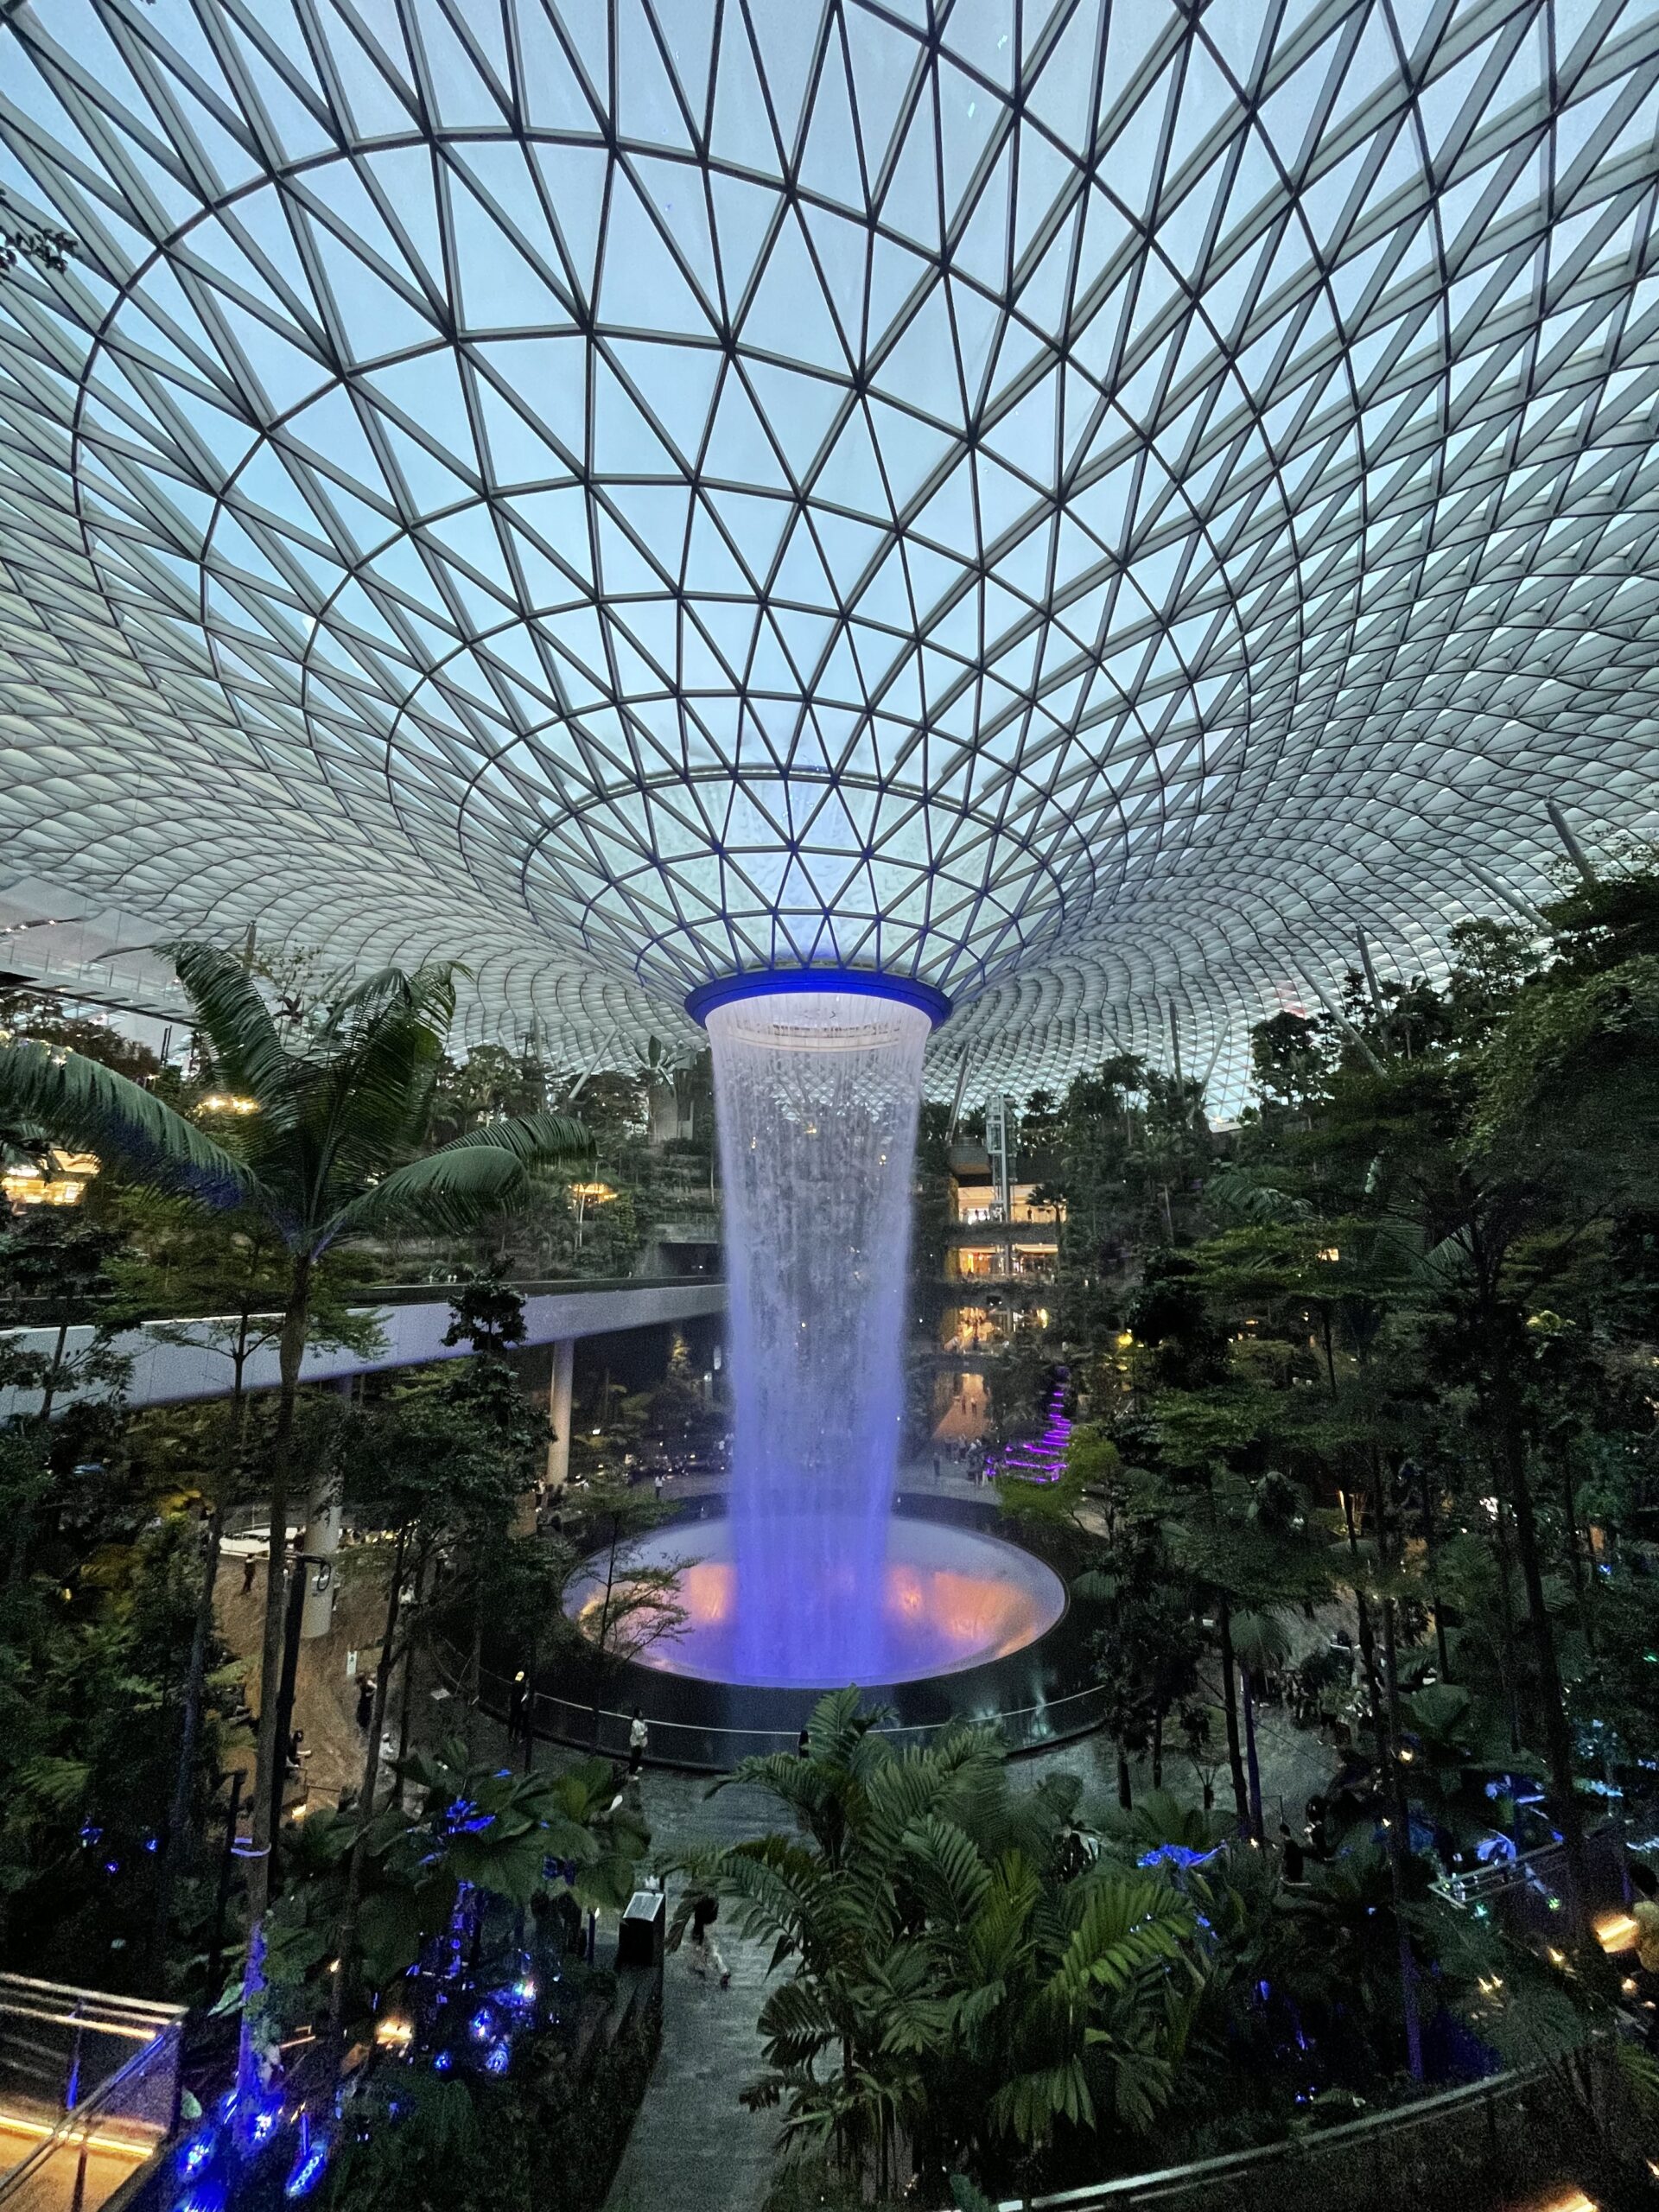 Singapore's Changi Airport Terminal 2 to fully reopen in October